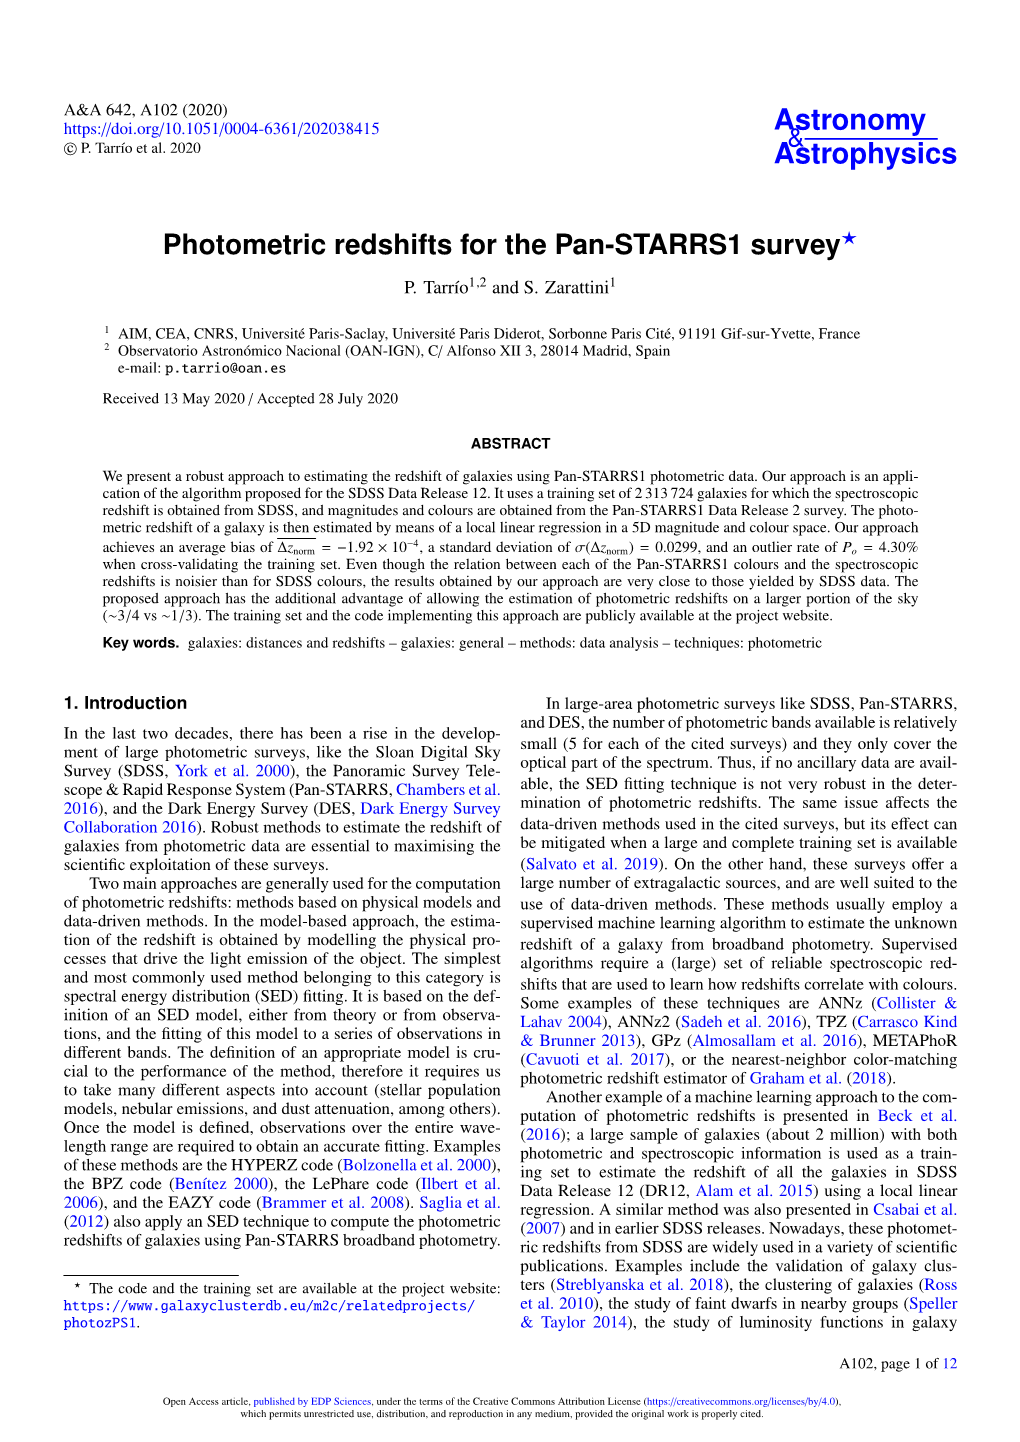 Photometric Redshifts for the Pan-STARRS1 Survey? P